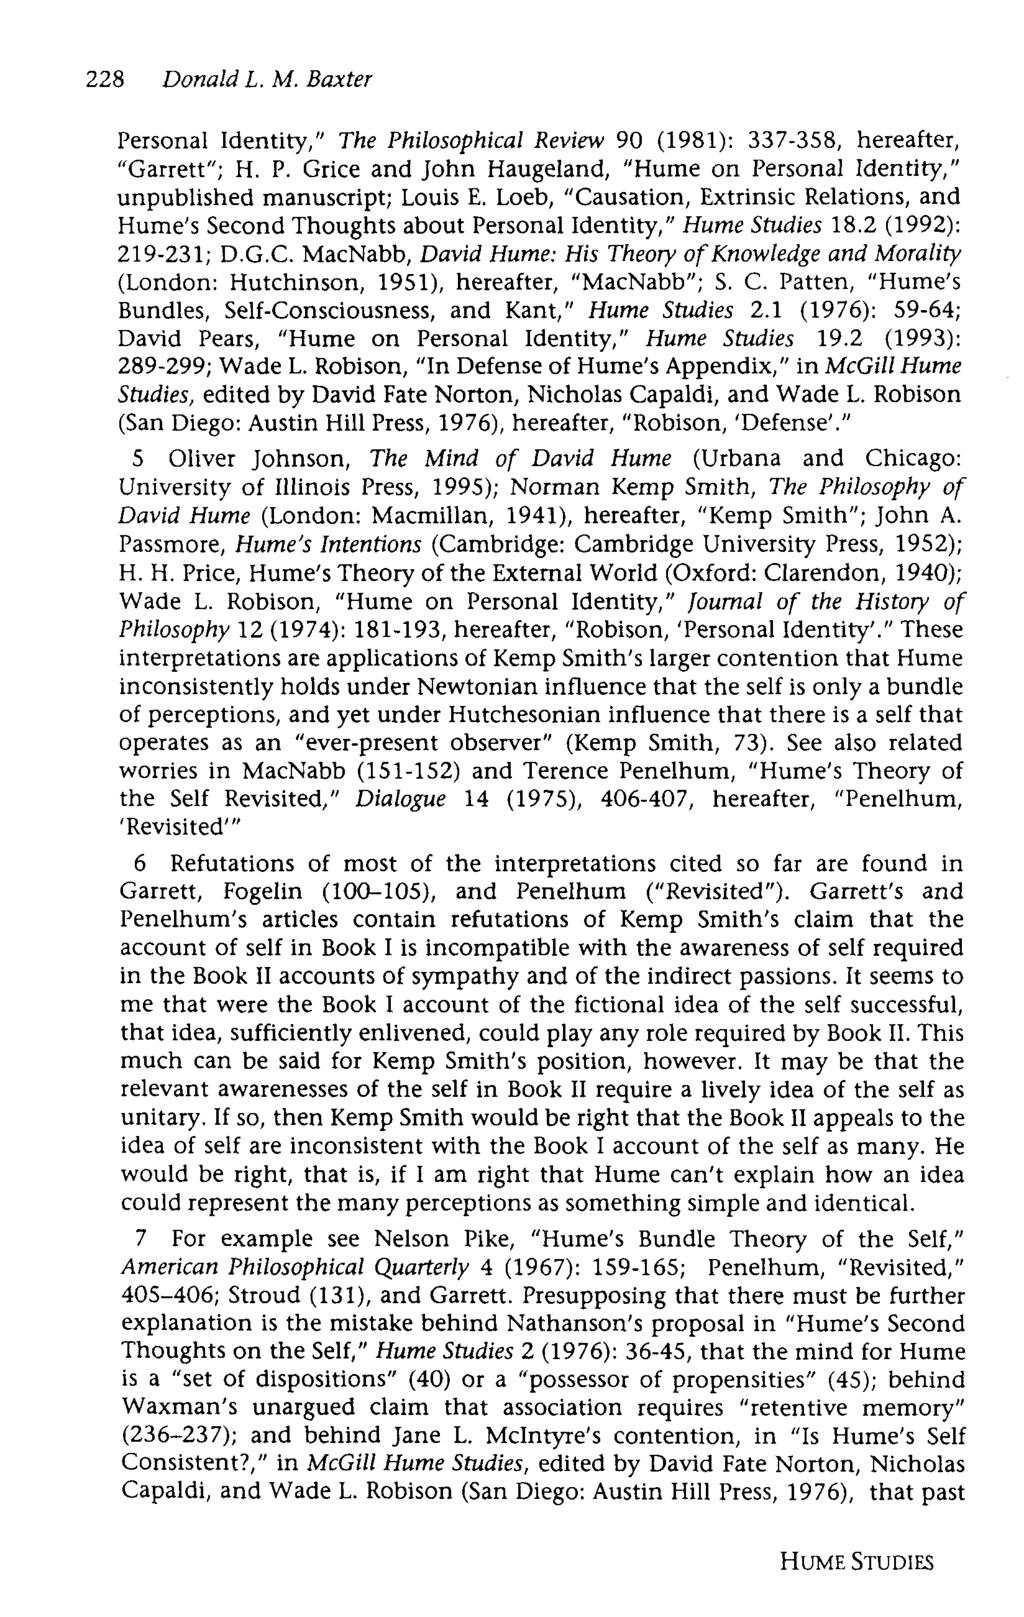 228 Donald L. M. Baxter Personal Identity, The Philosophical Review 90 (1981): 337-358, hereafter, Garrett ; H. P. Grice and John Haugeland, Hume on Personal Identity, unpublished manuscript; Louis E.